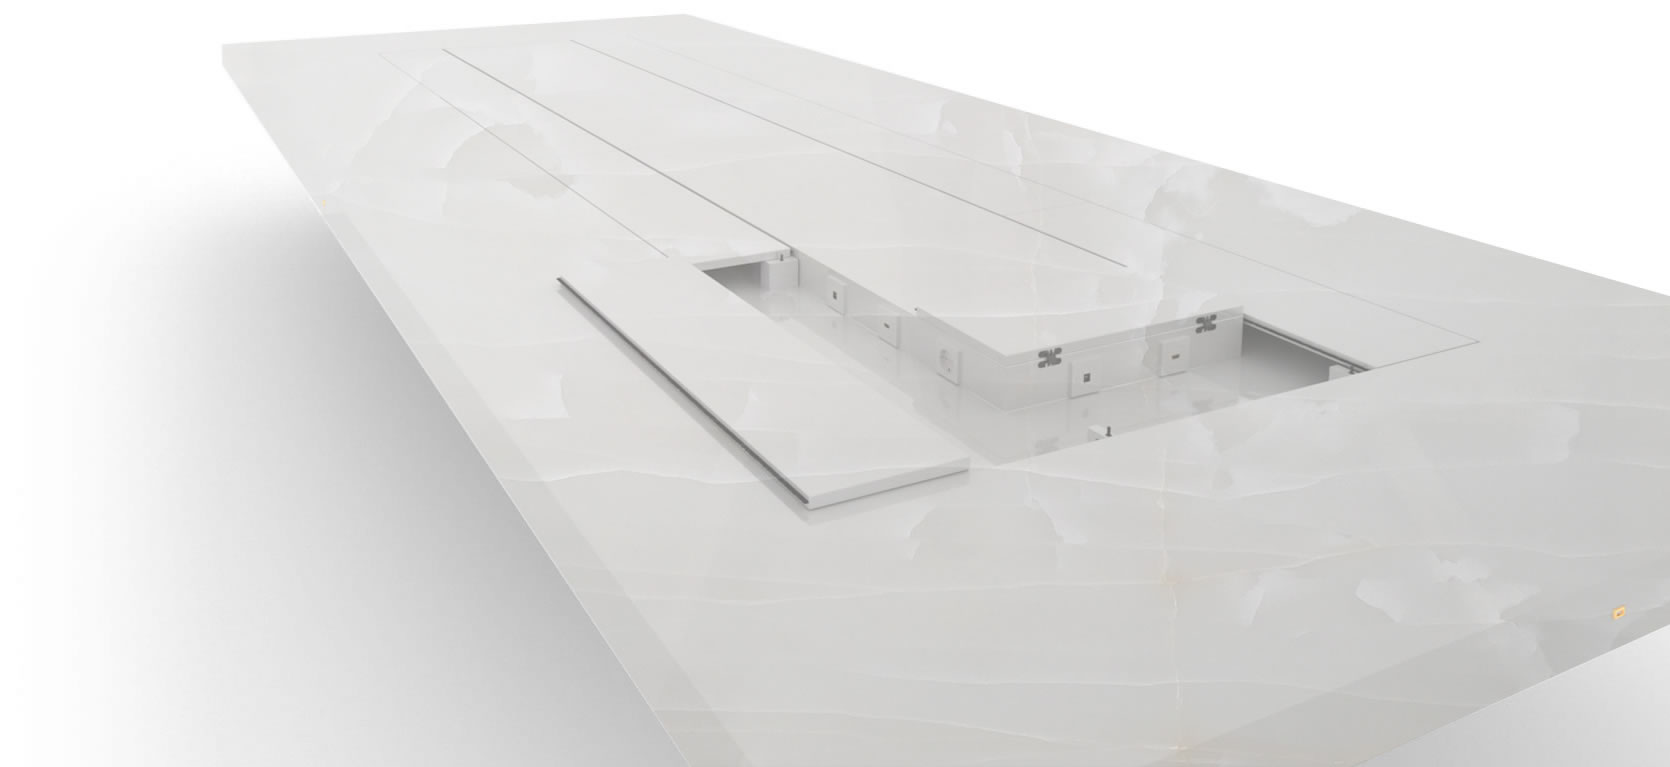 FELIX SCHWAKE BOARDROOM TABLE II V large structure onyx marble white modern boardroom table structure